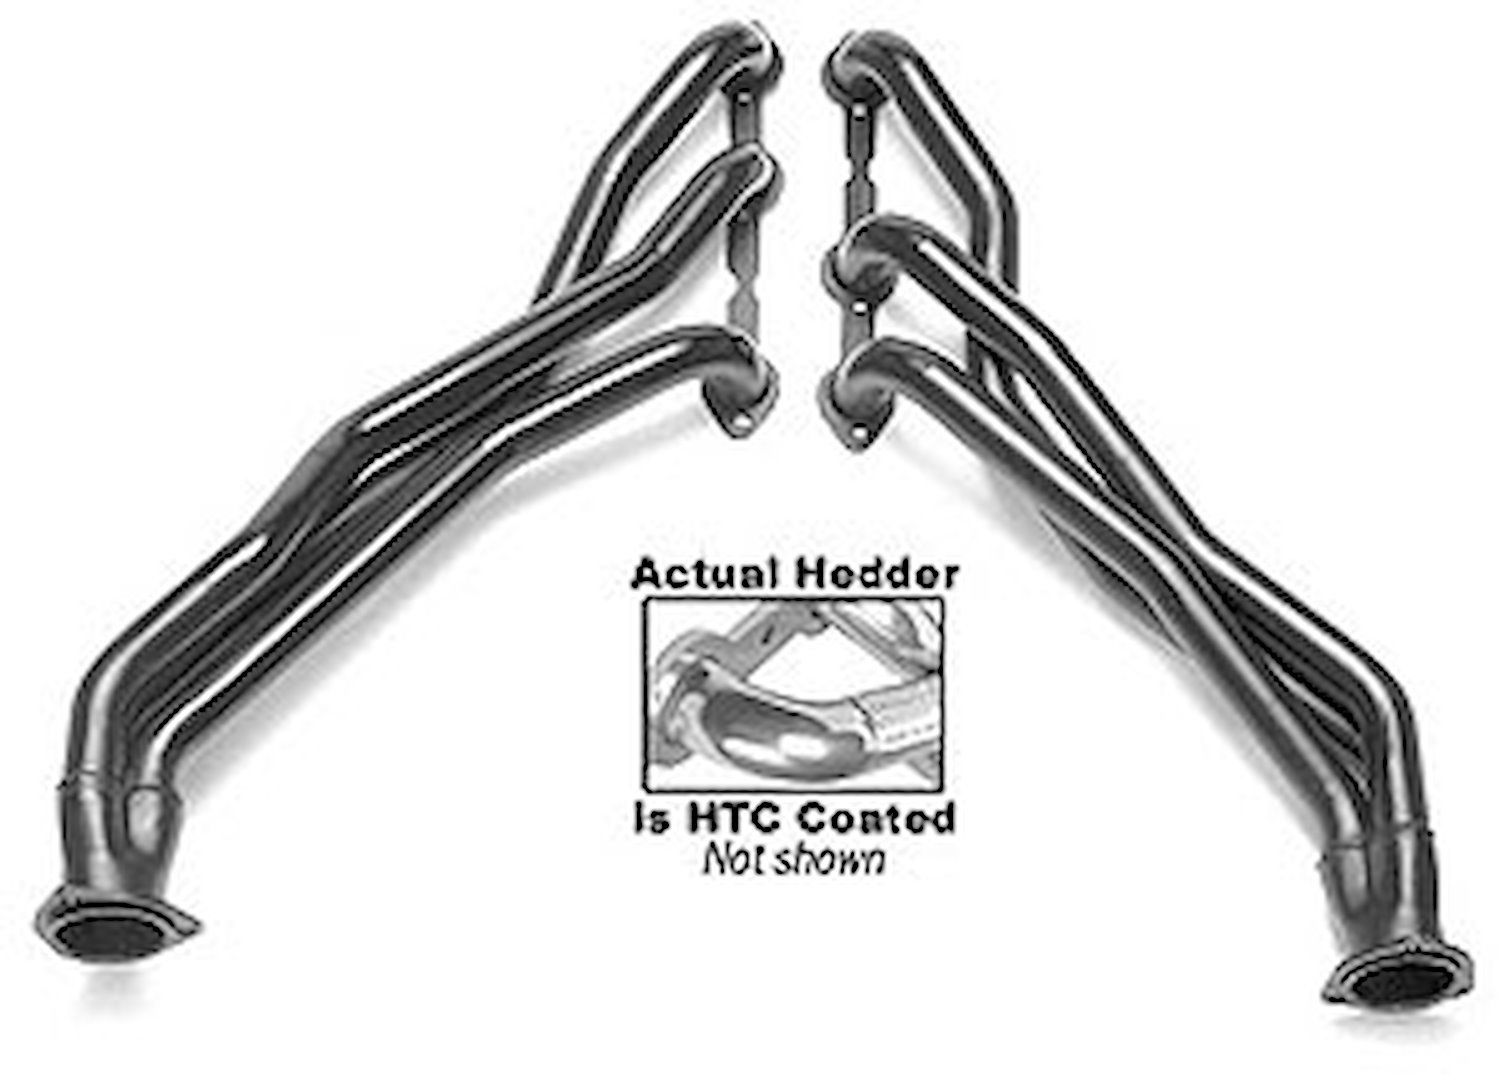 Standard Duty HTC Coated Full-Length Headers 1988-93 Chevy